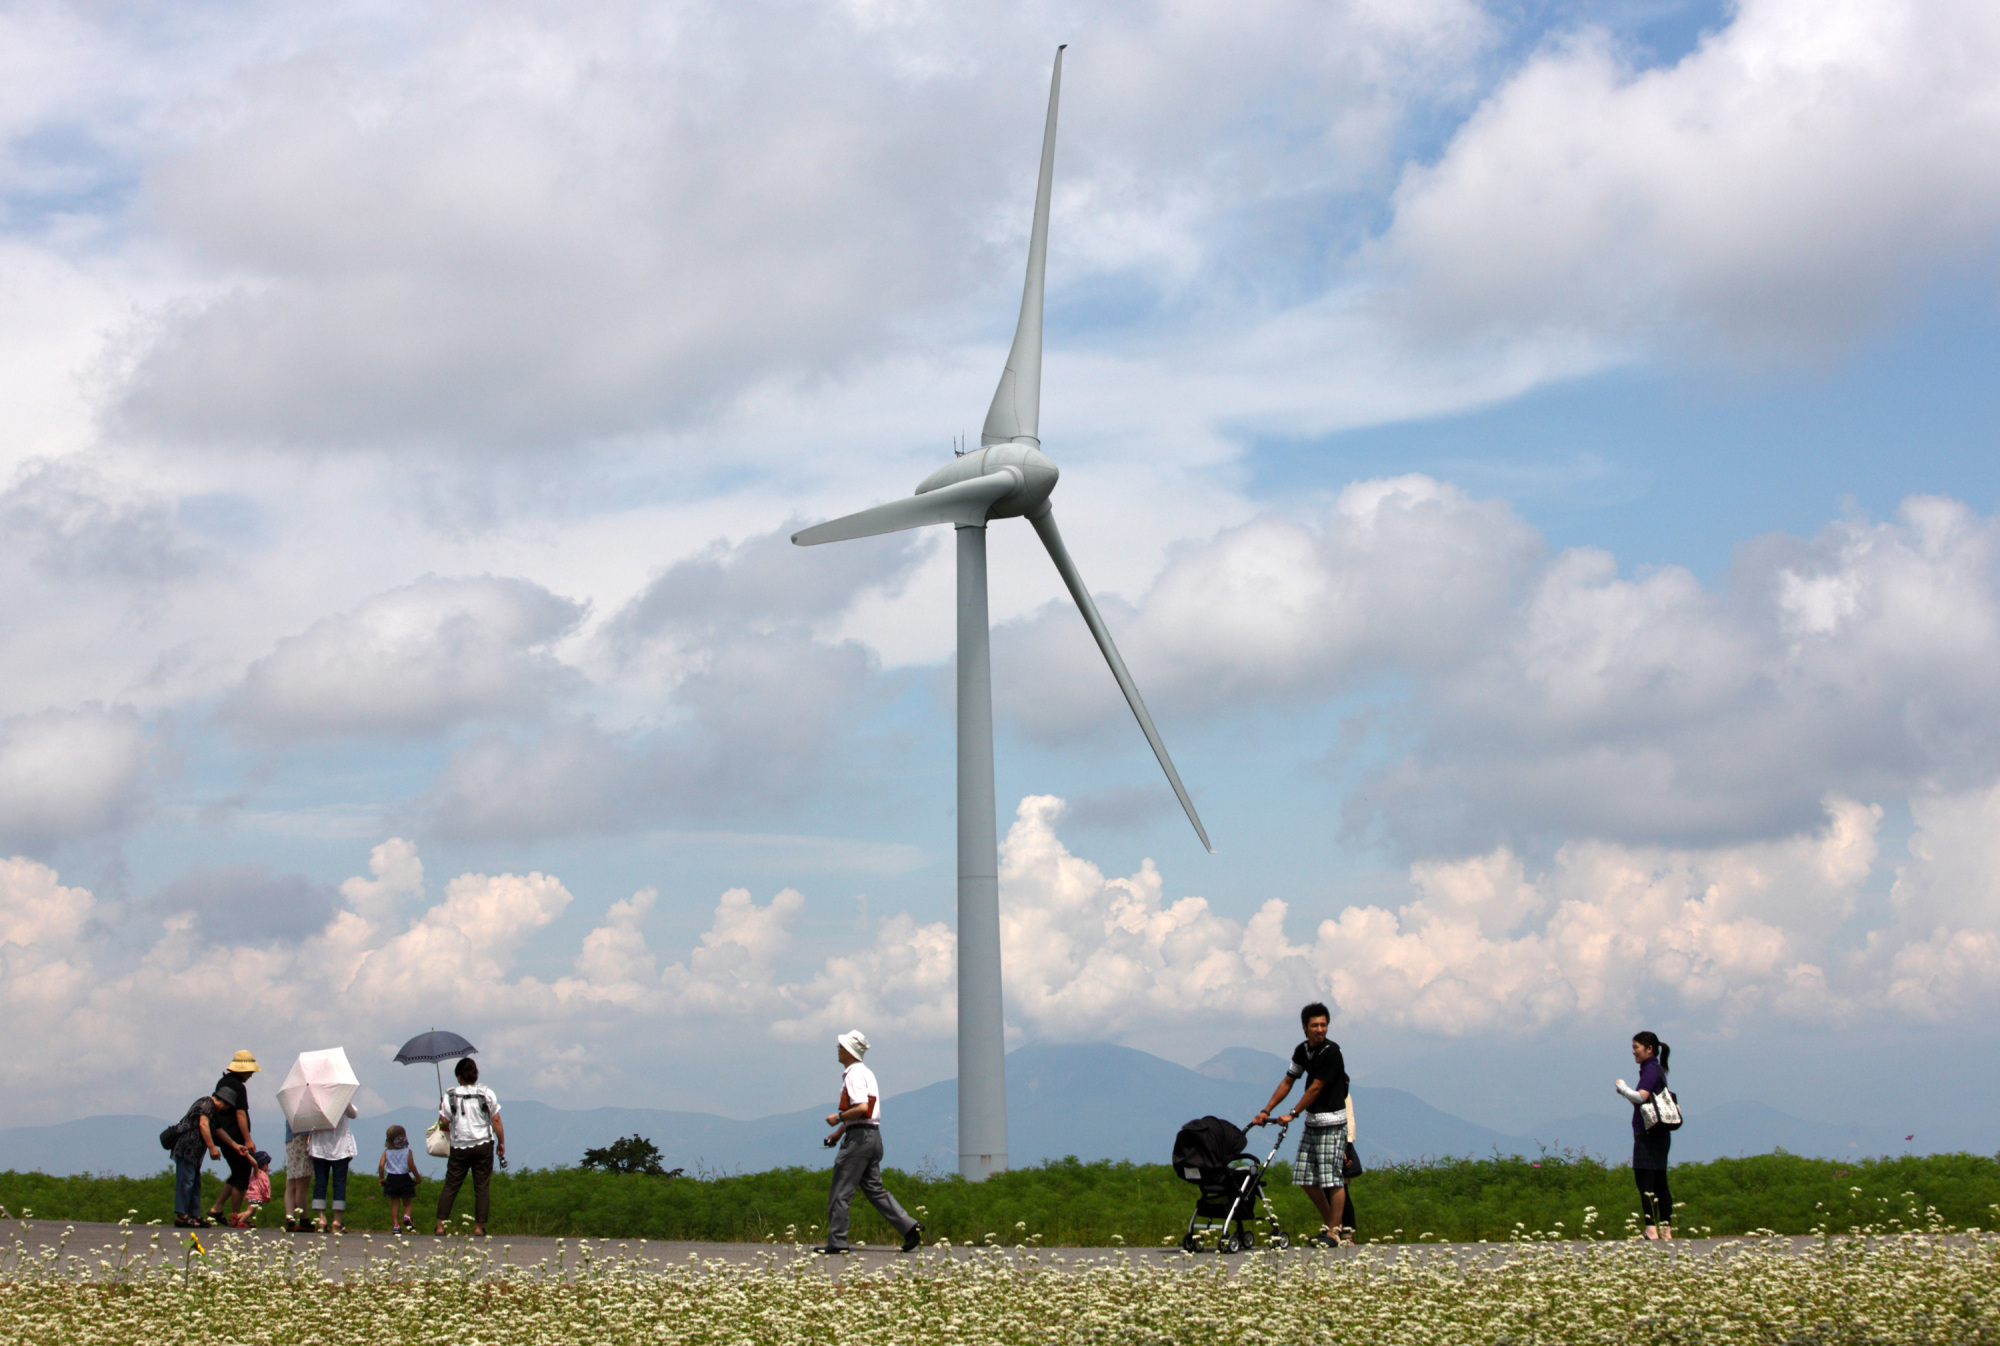 People walk past a turbine at the Electric Power Development Co. wind farm near the city of Koriyama, Fukushima Prefecture in August 2012. | BLOOMBERG